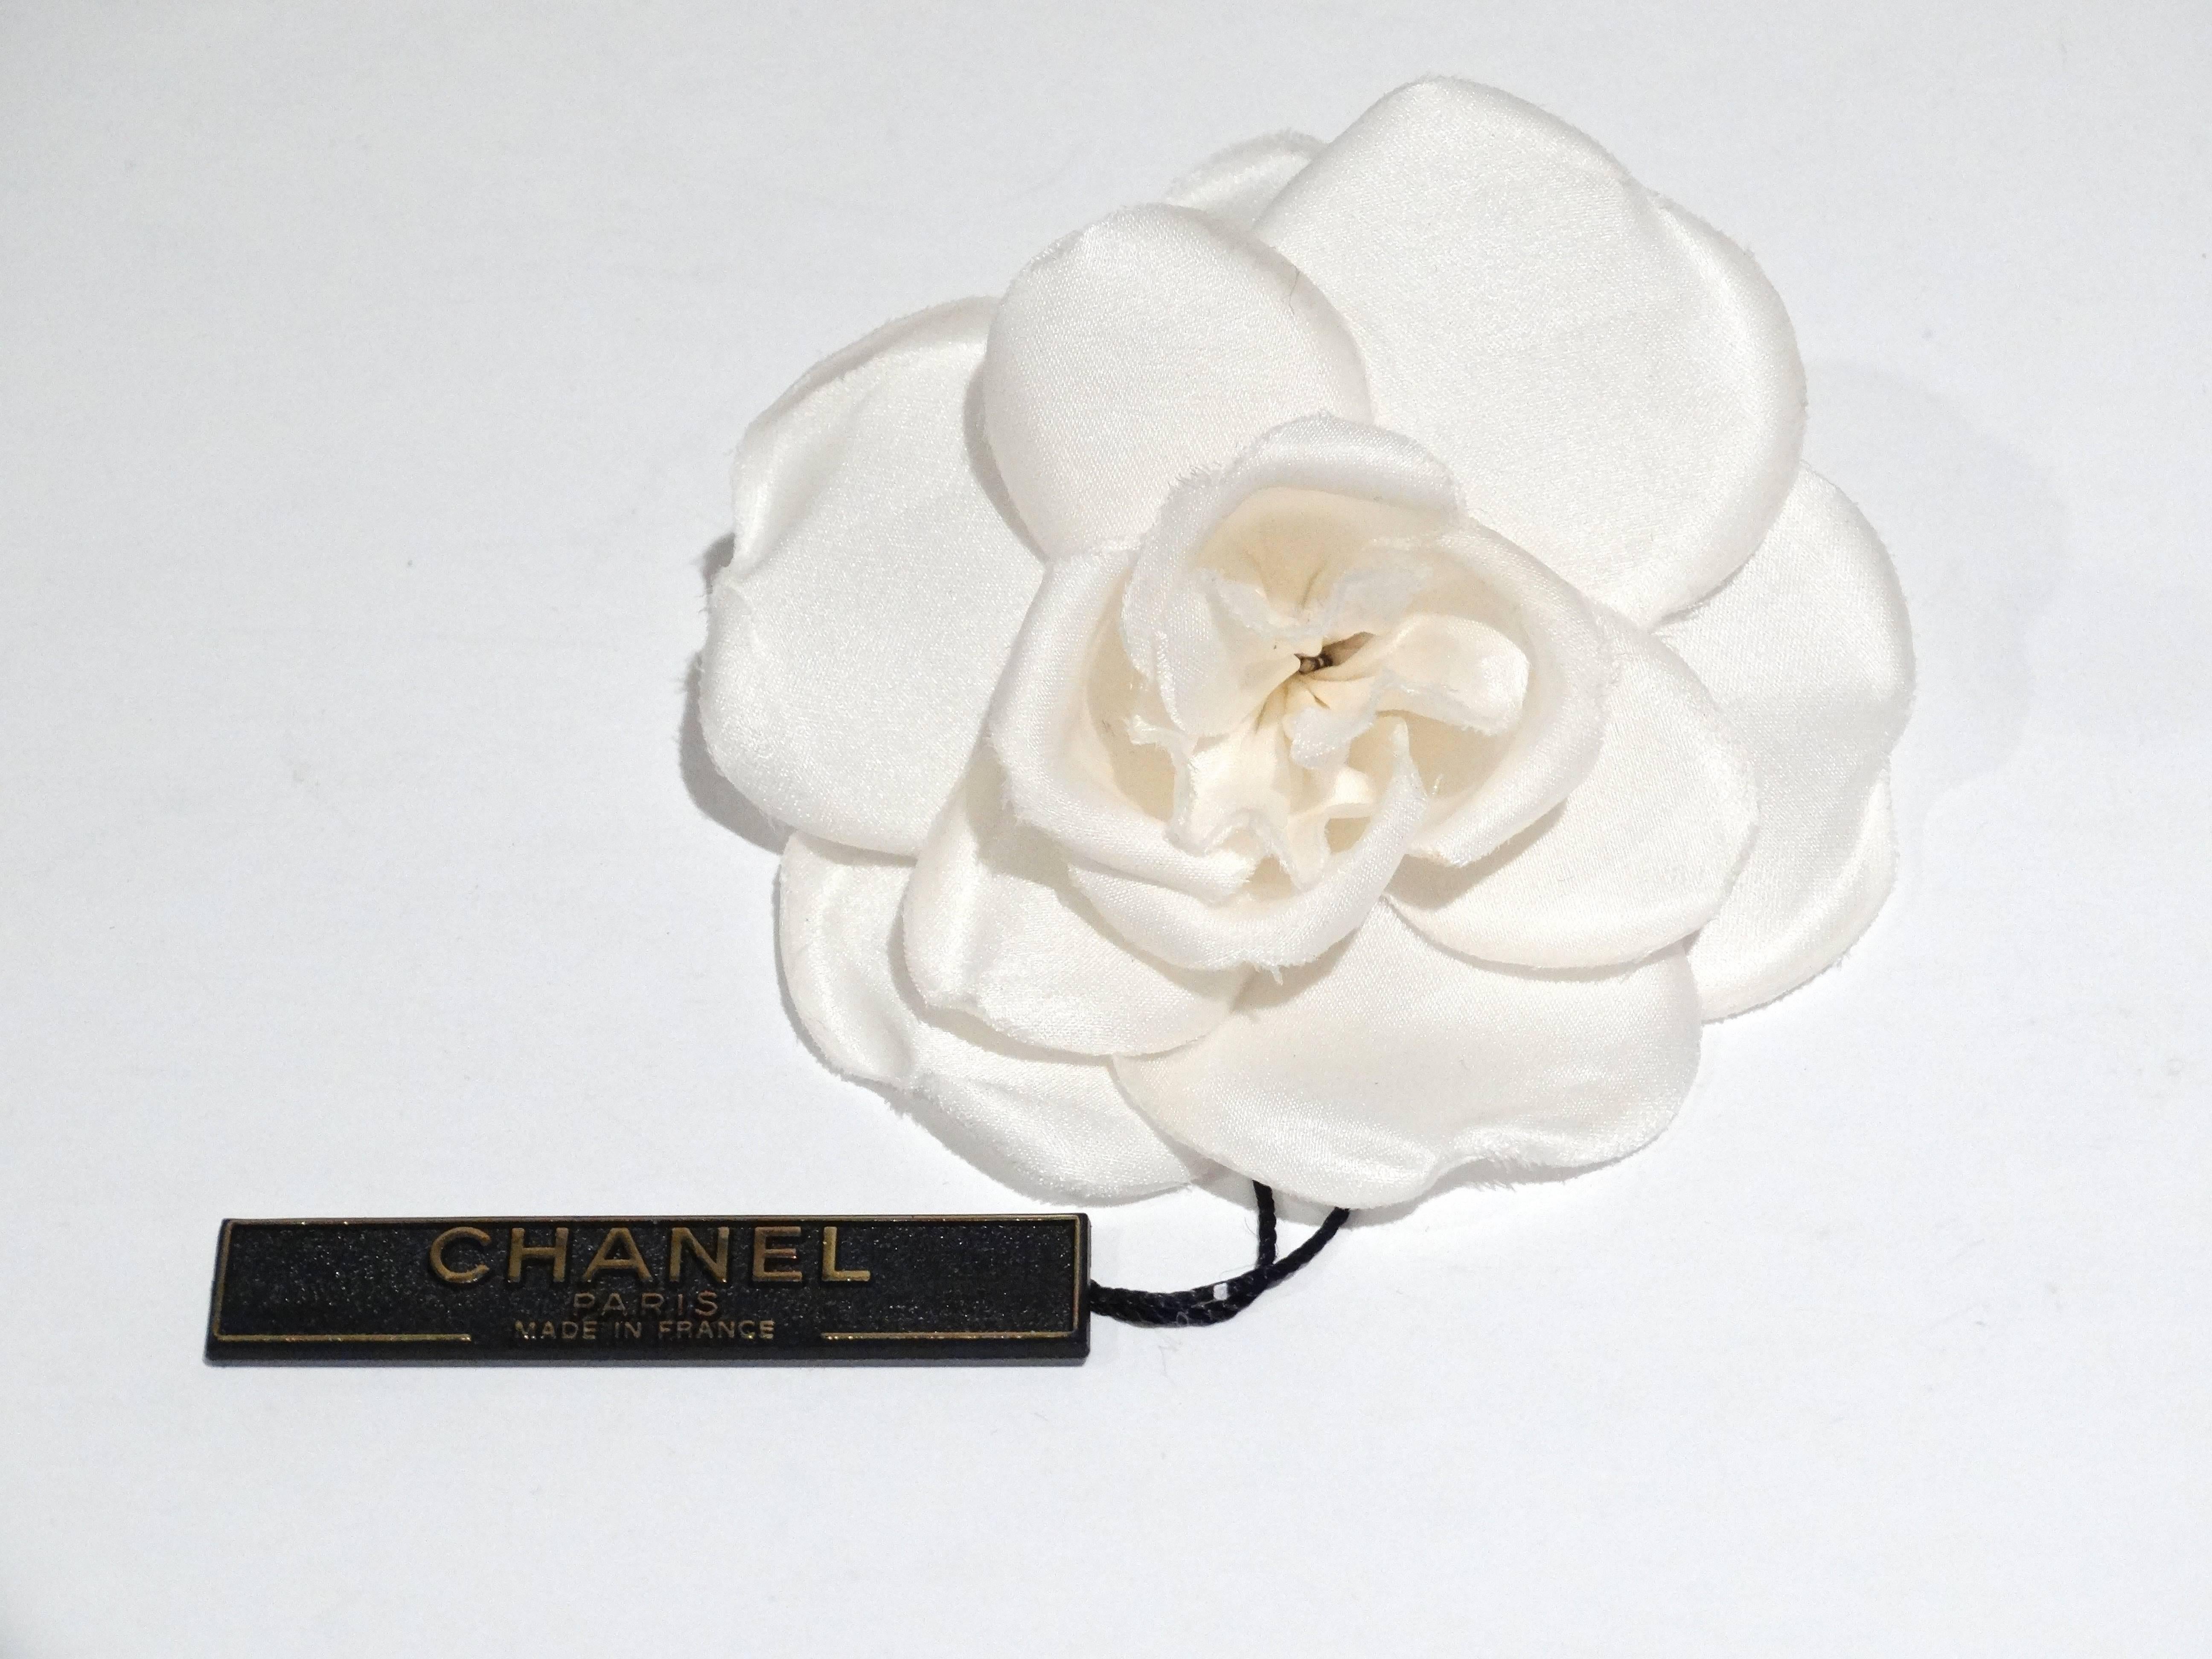 This is an authentic 1996 A CHANEL Fabric Camellia Flower Brooch White. The elegant style and classic quality of this Chanel brooch make an iconic fashion accessory. This is a wonderful pin and a piece of Chanel tradition as Chanel has made the